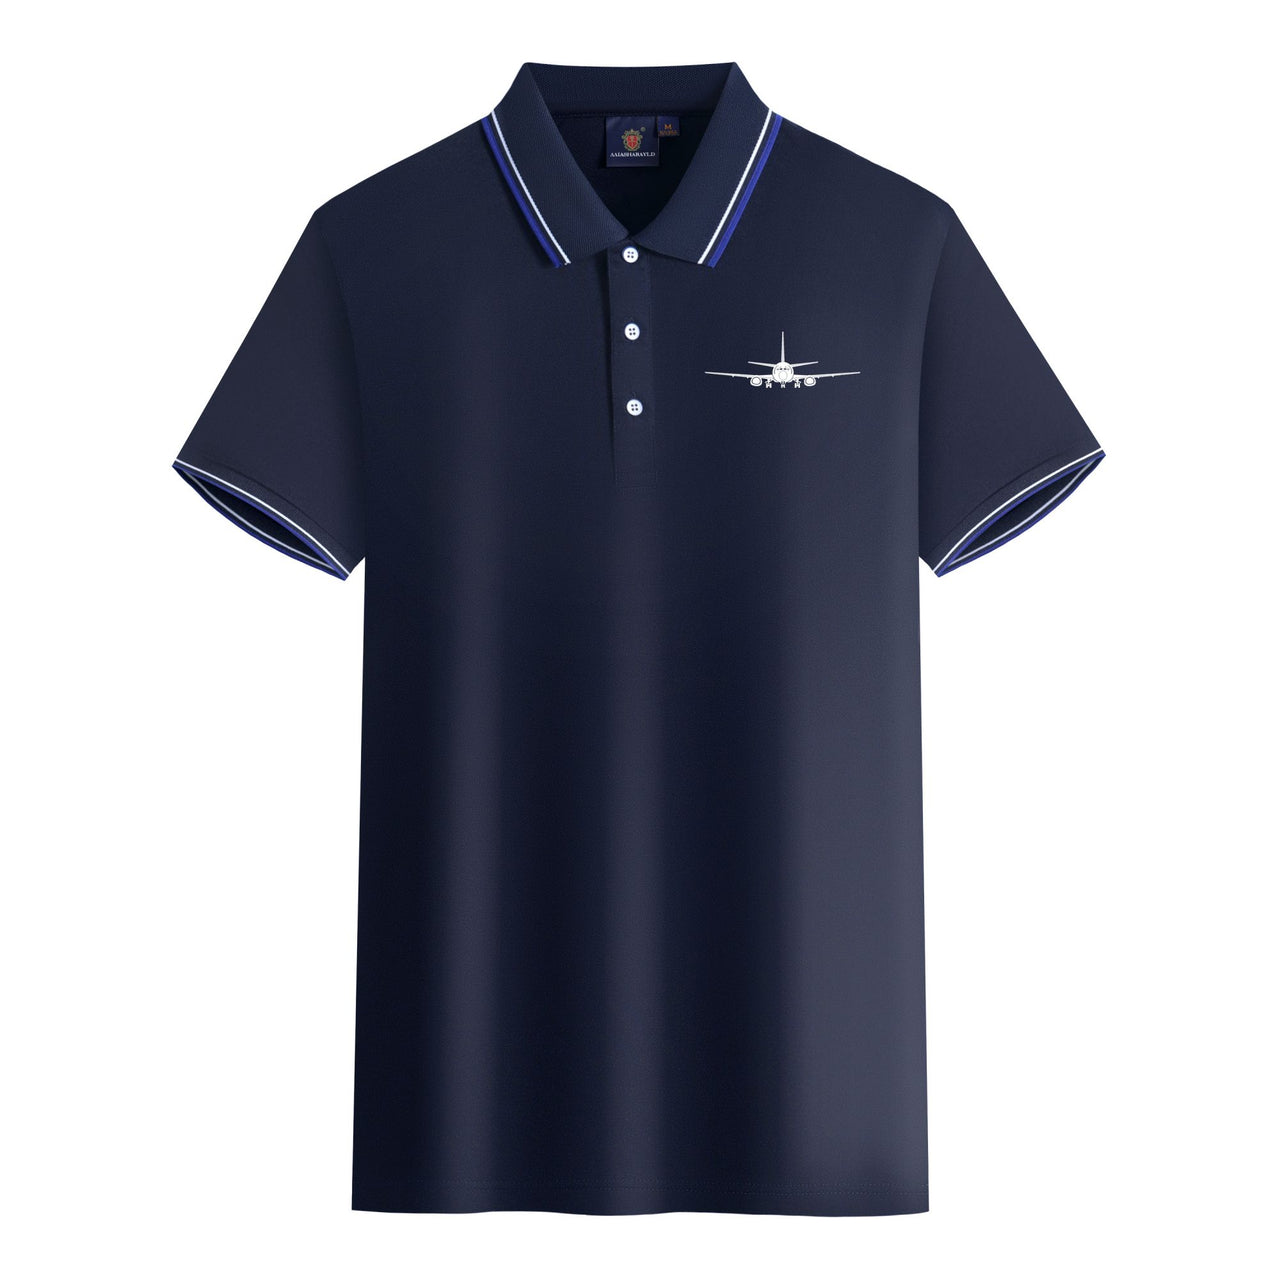 Boeing 737 Silhouette Designed Stylish Polo T-Shirts